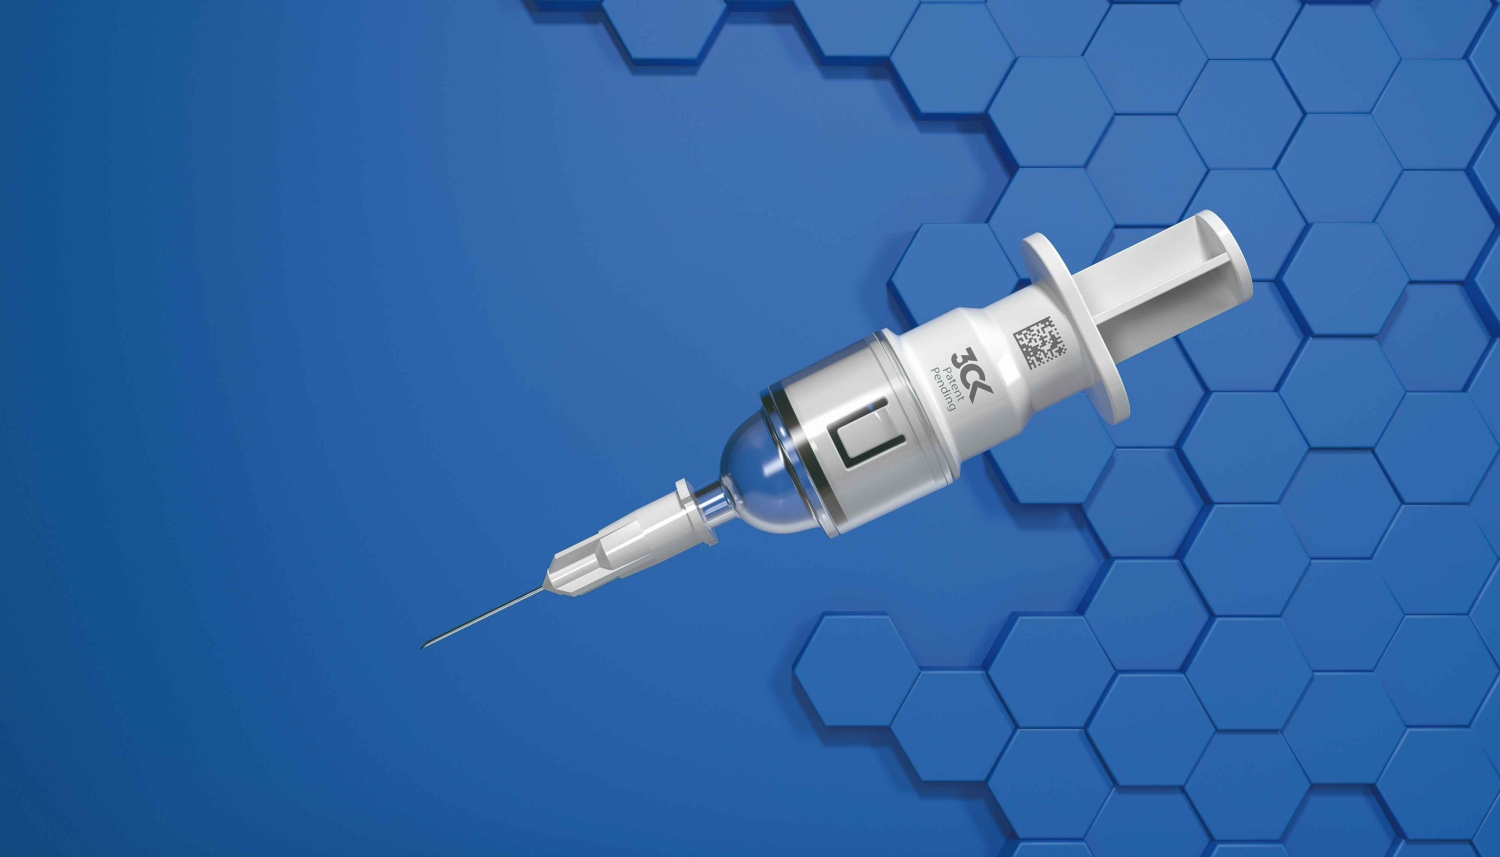 O-Flow by 3CK: the new era of prefilled syringes